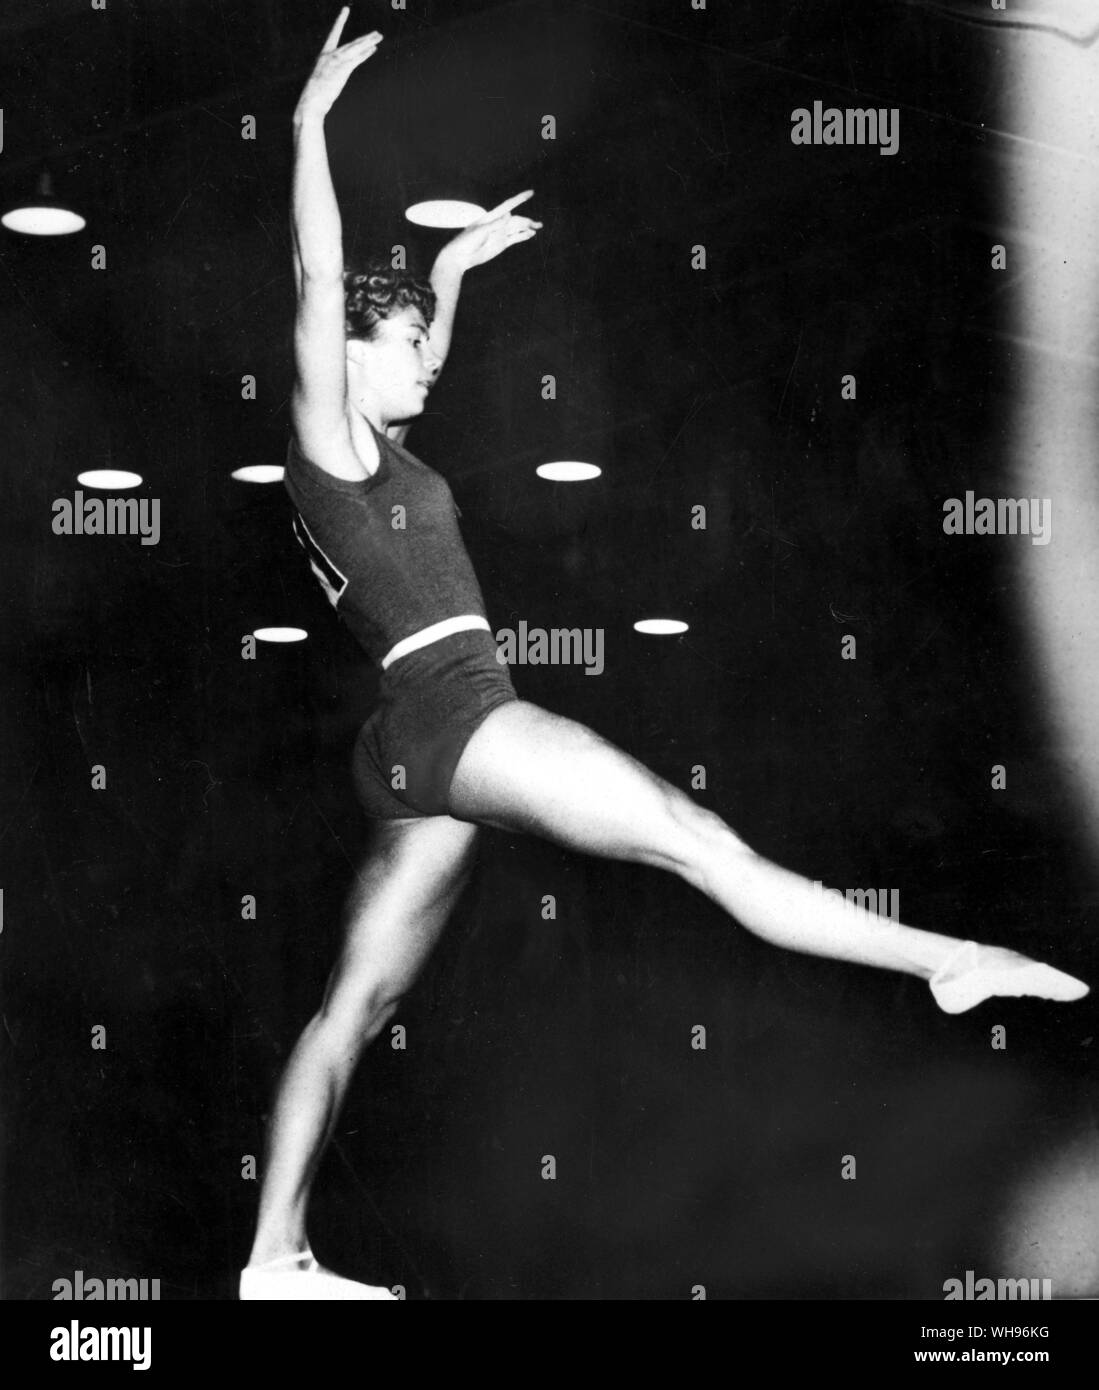 Aus., Melbourne, Olympics, 1956: Larisa Latynina (USSR), winner of nine gold medals, five silver and four bronze in gymnastics.. Stock Photo